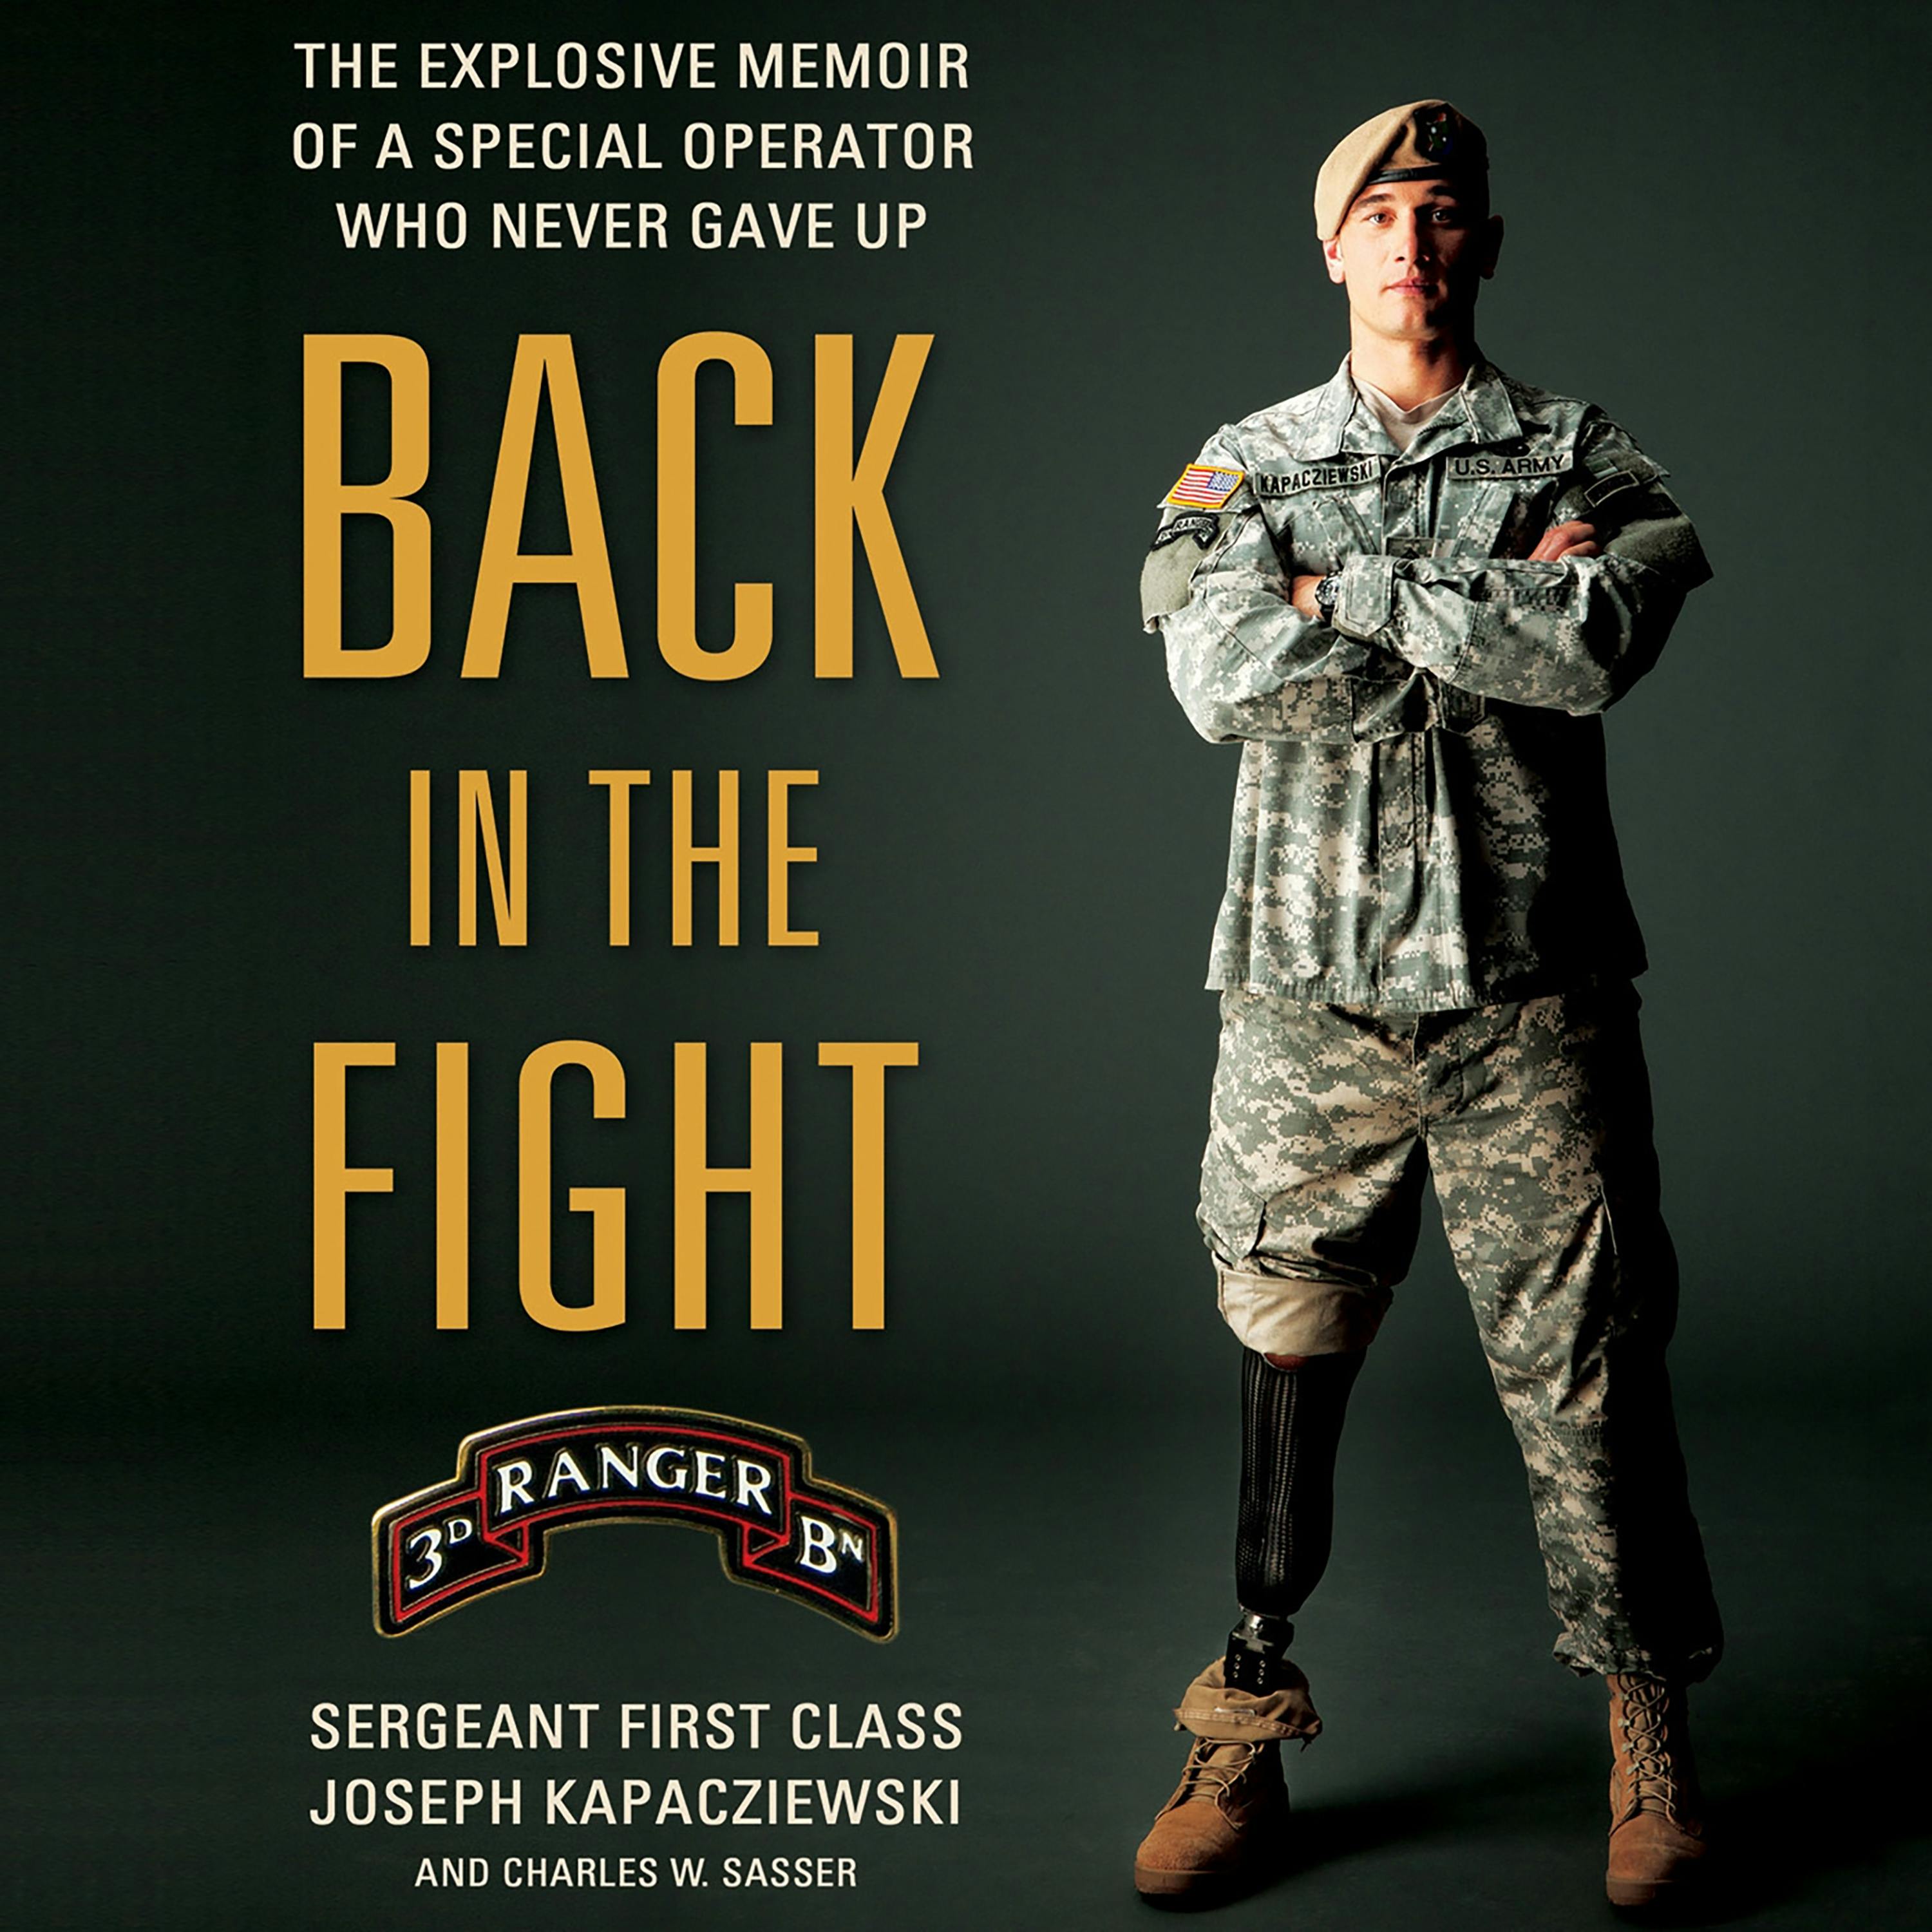 Army Ranger Transforms Body And Mind